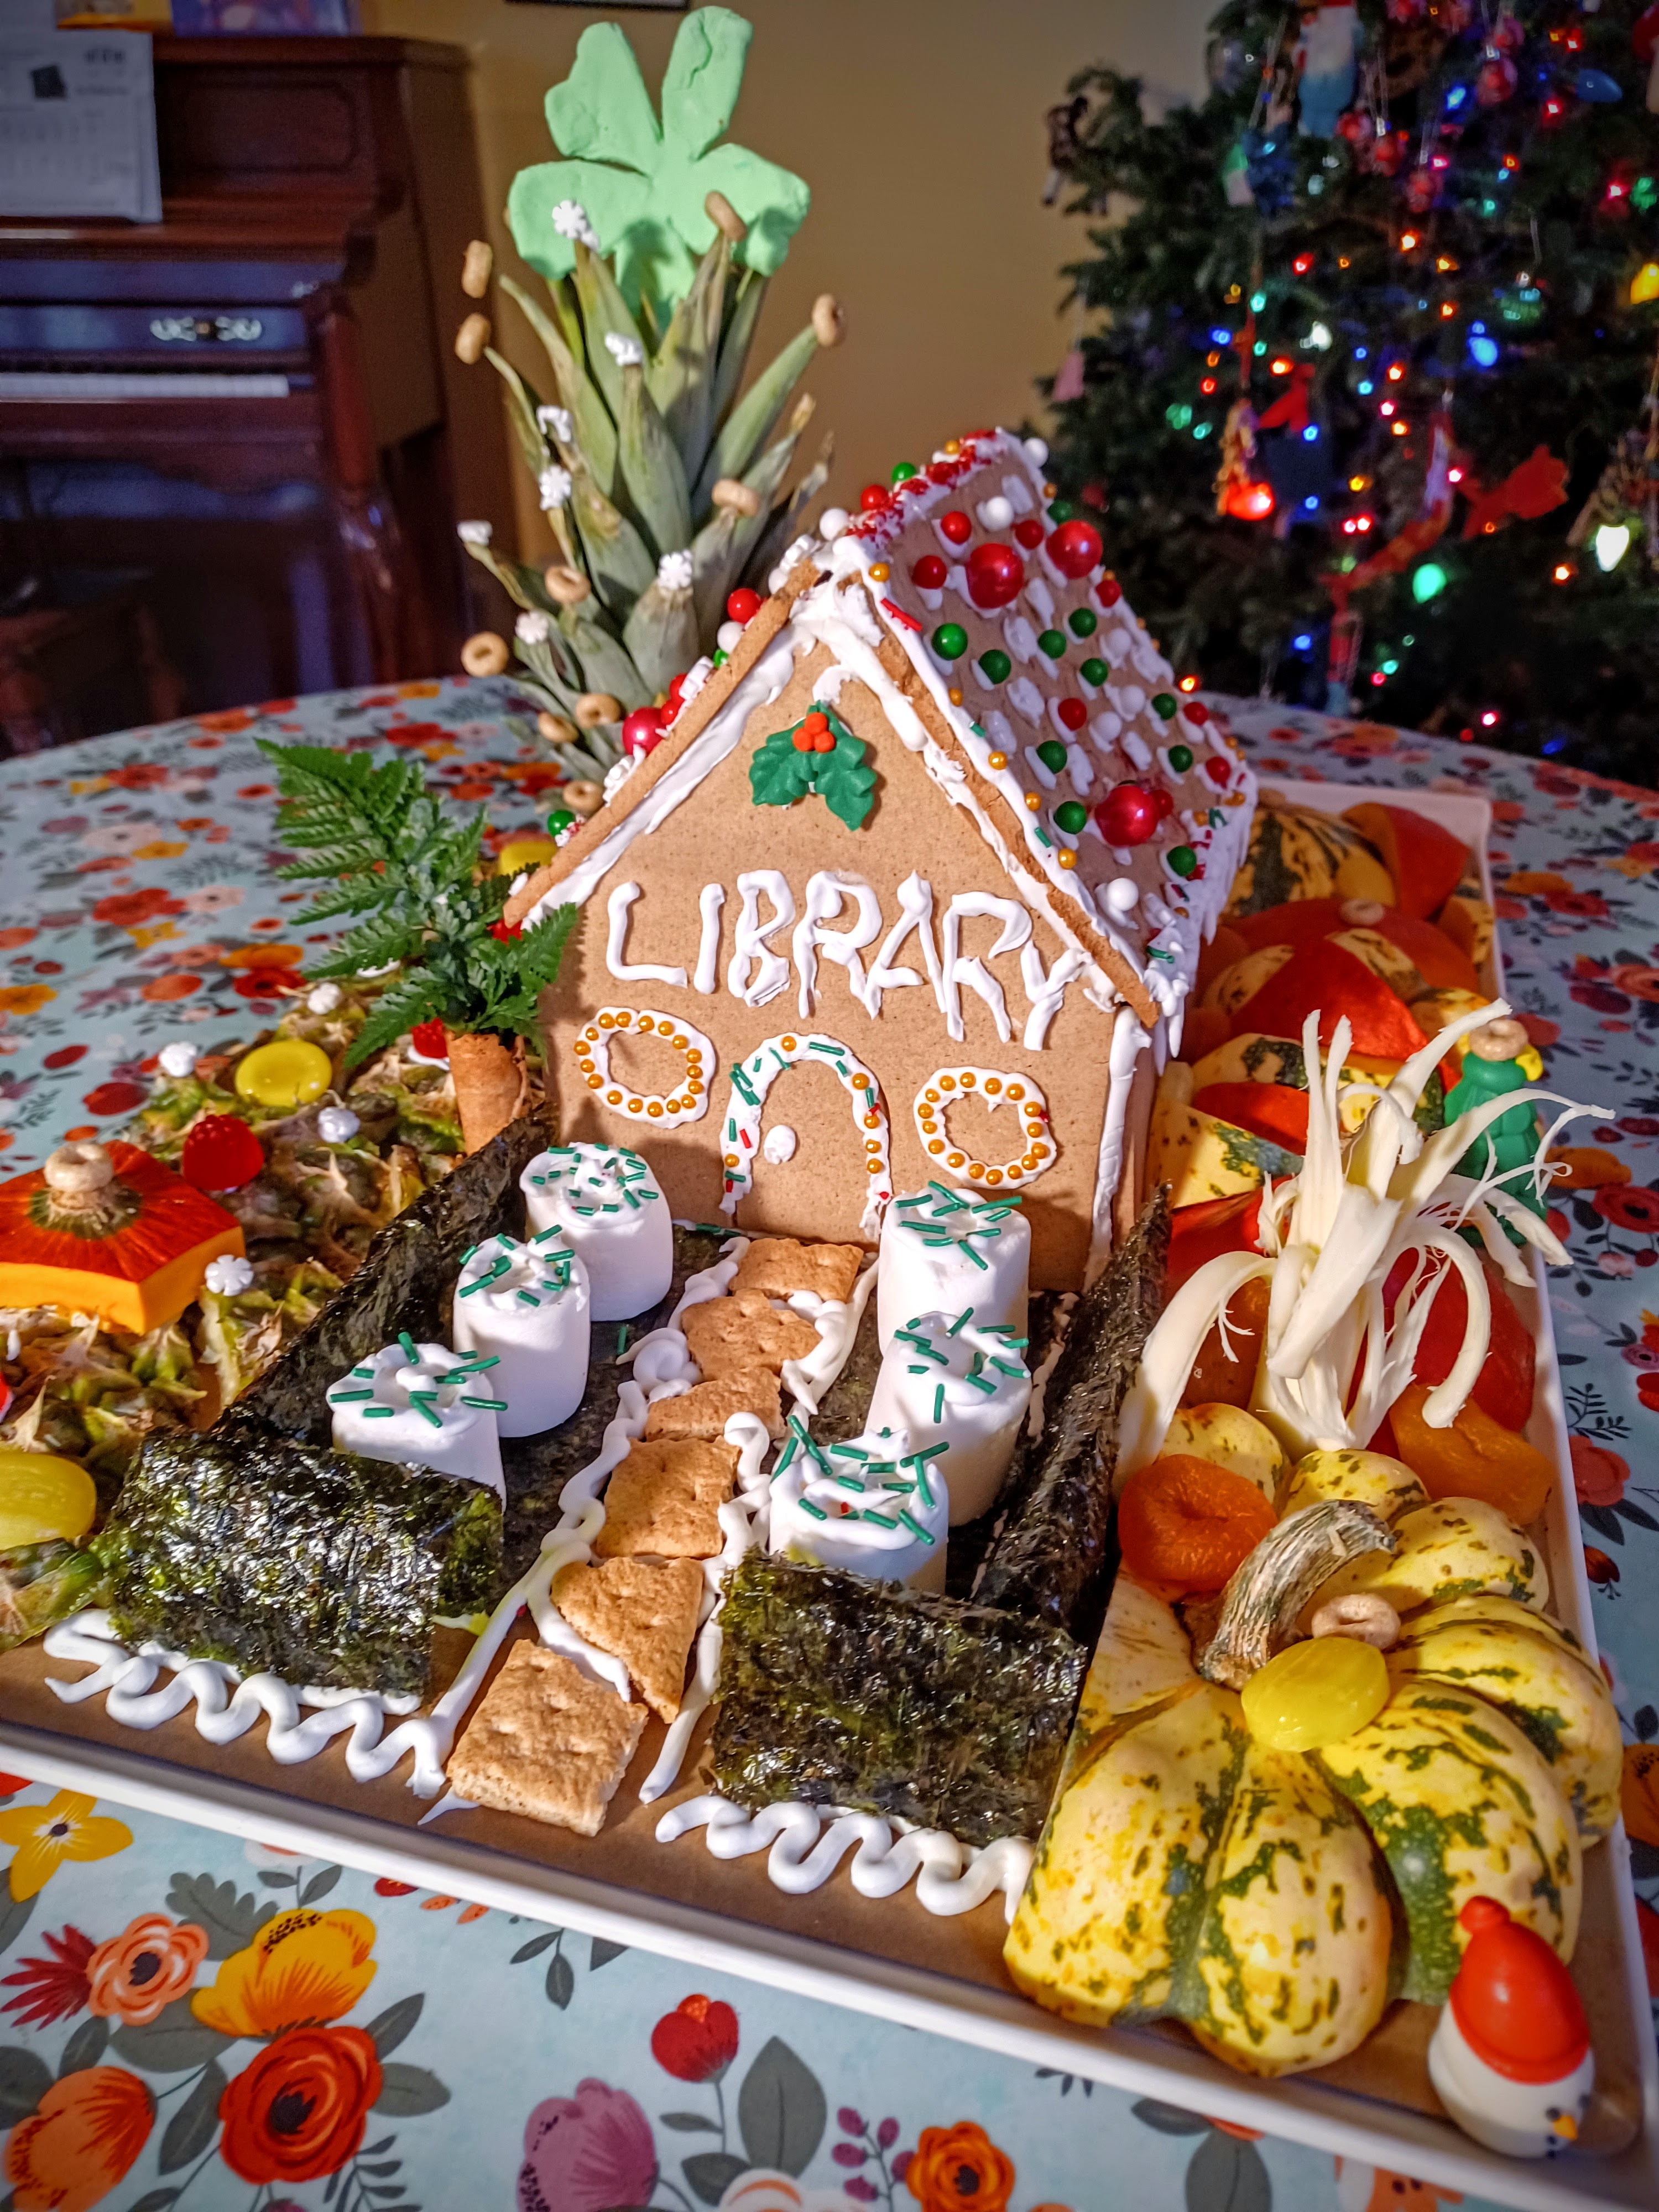 A gingerbread library has a garden made from marshmallows and vegetable scraps.